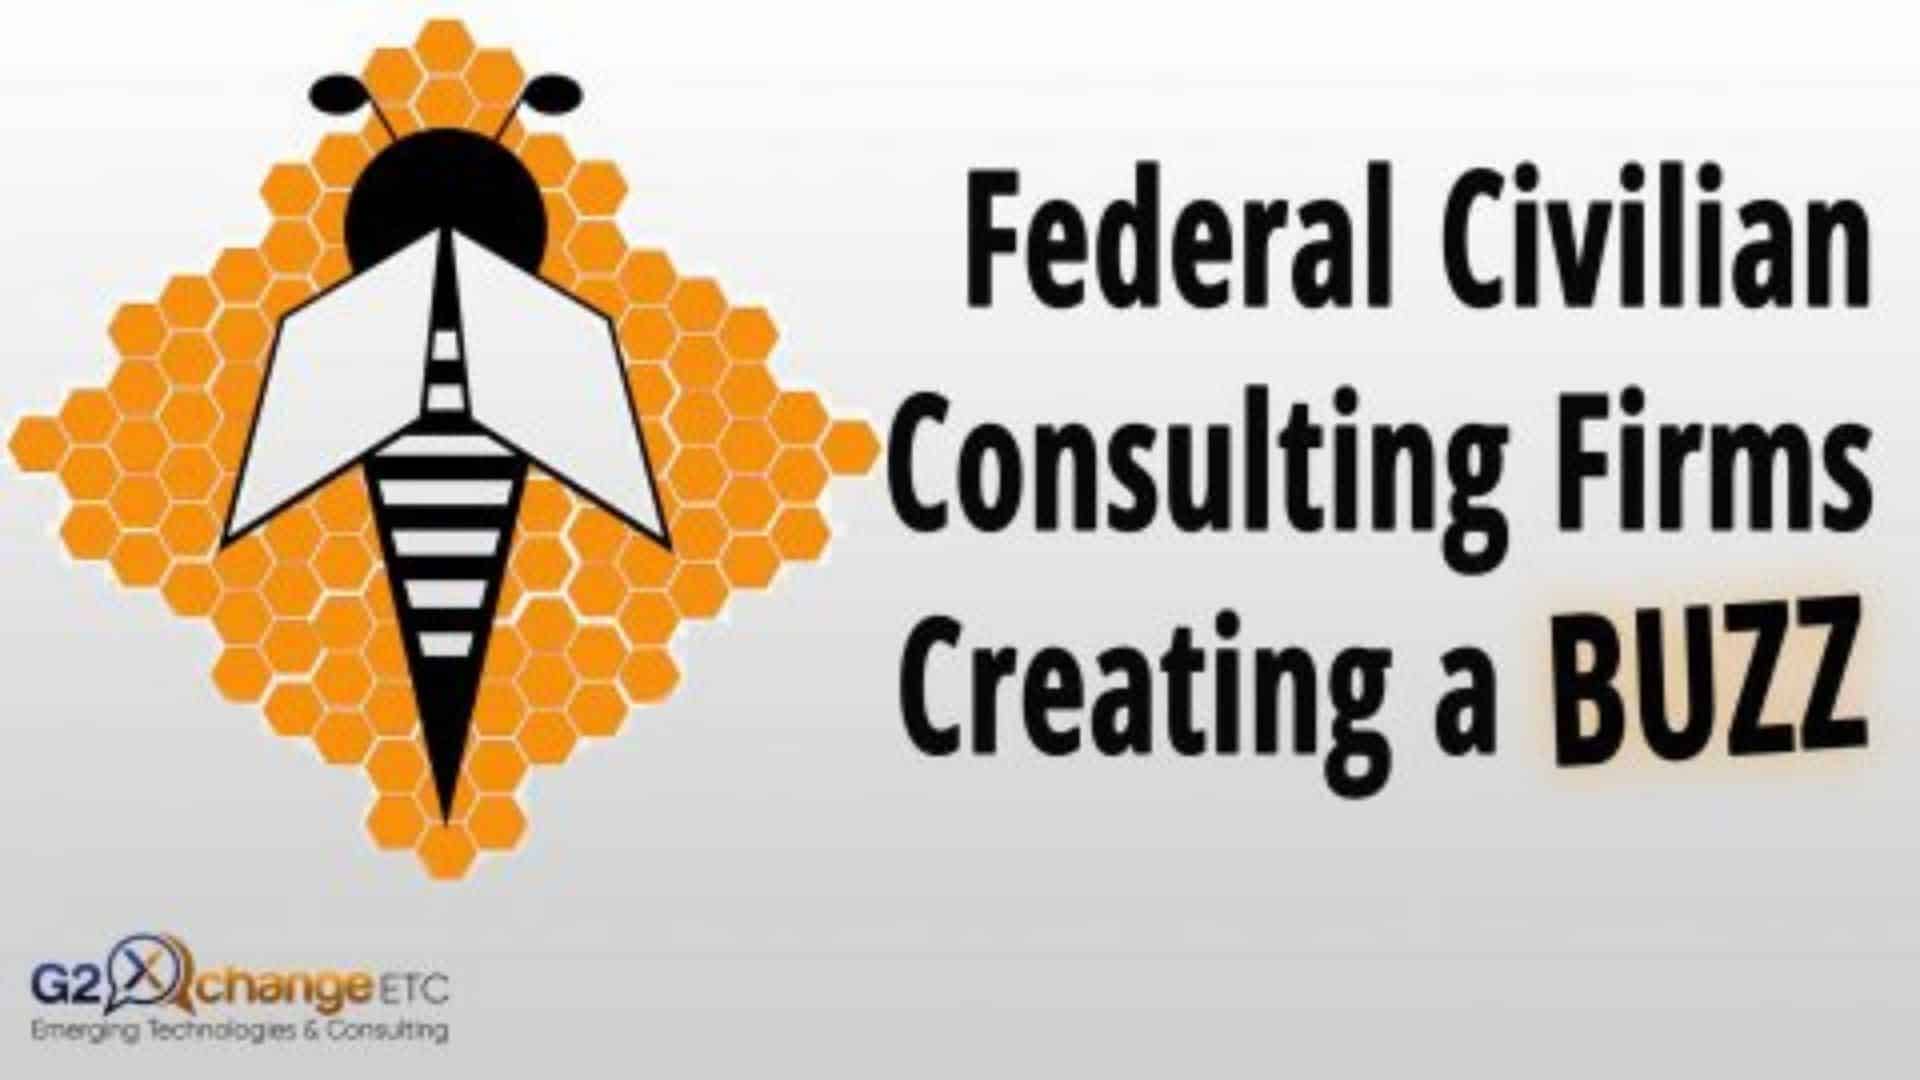 REI Named One of the Top “Federal Civilian IT & Consulting Firms creating a BUZZ for the First Half of 2019”